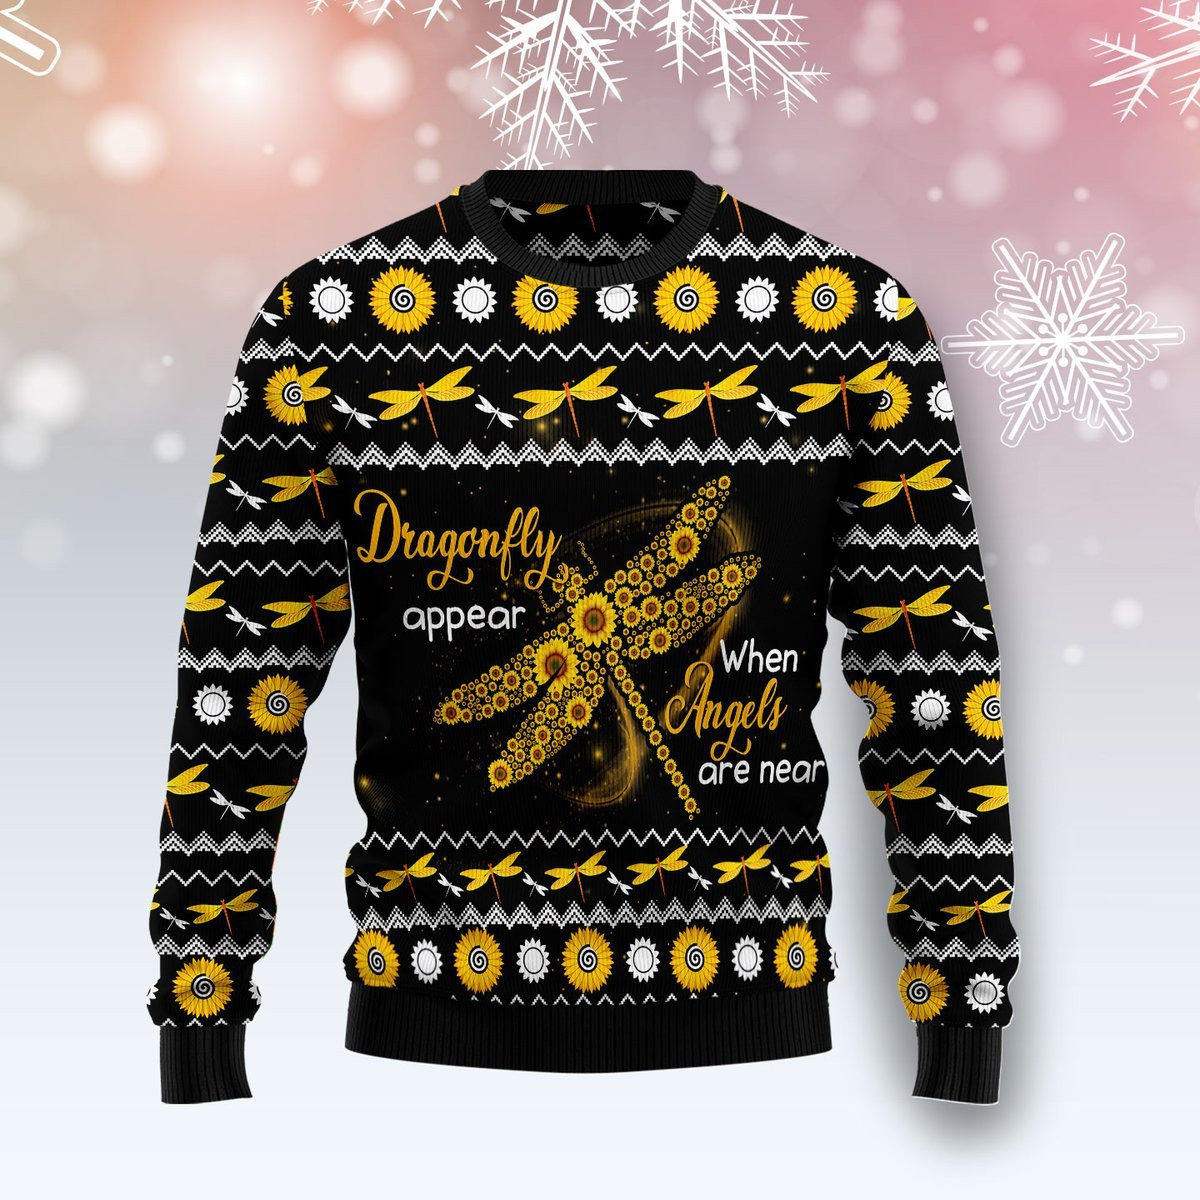 Dragonfly Sunflower Ugly Christmas Sweater Ugly Sweater For Men Women